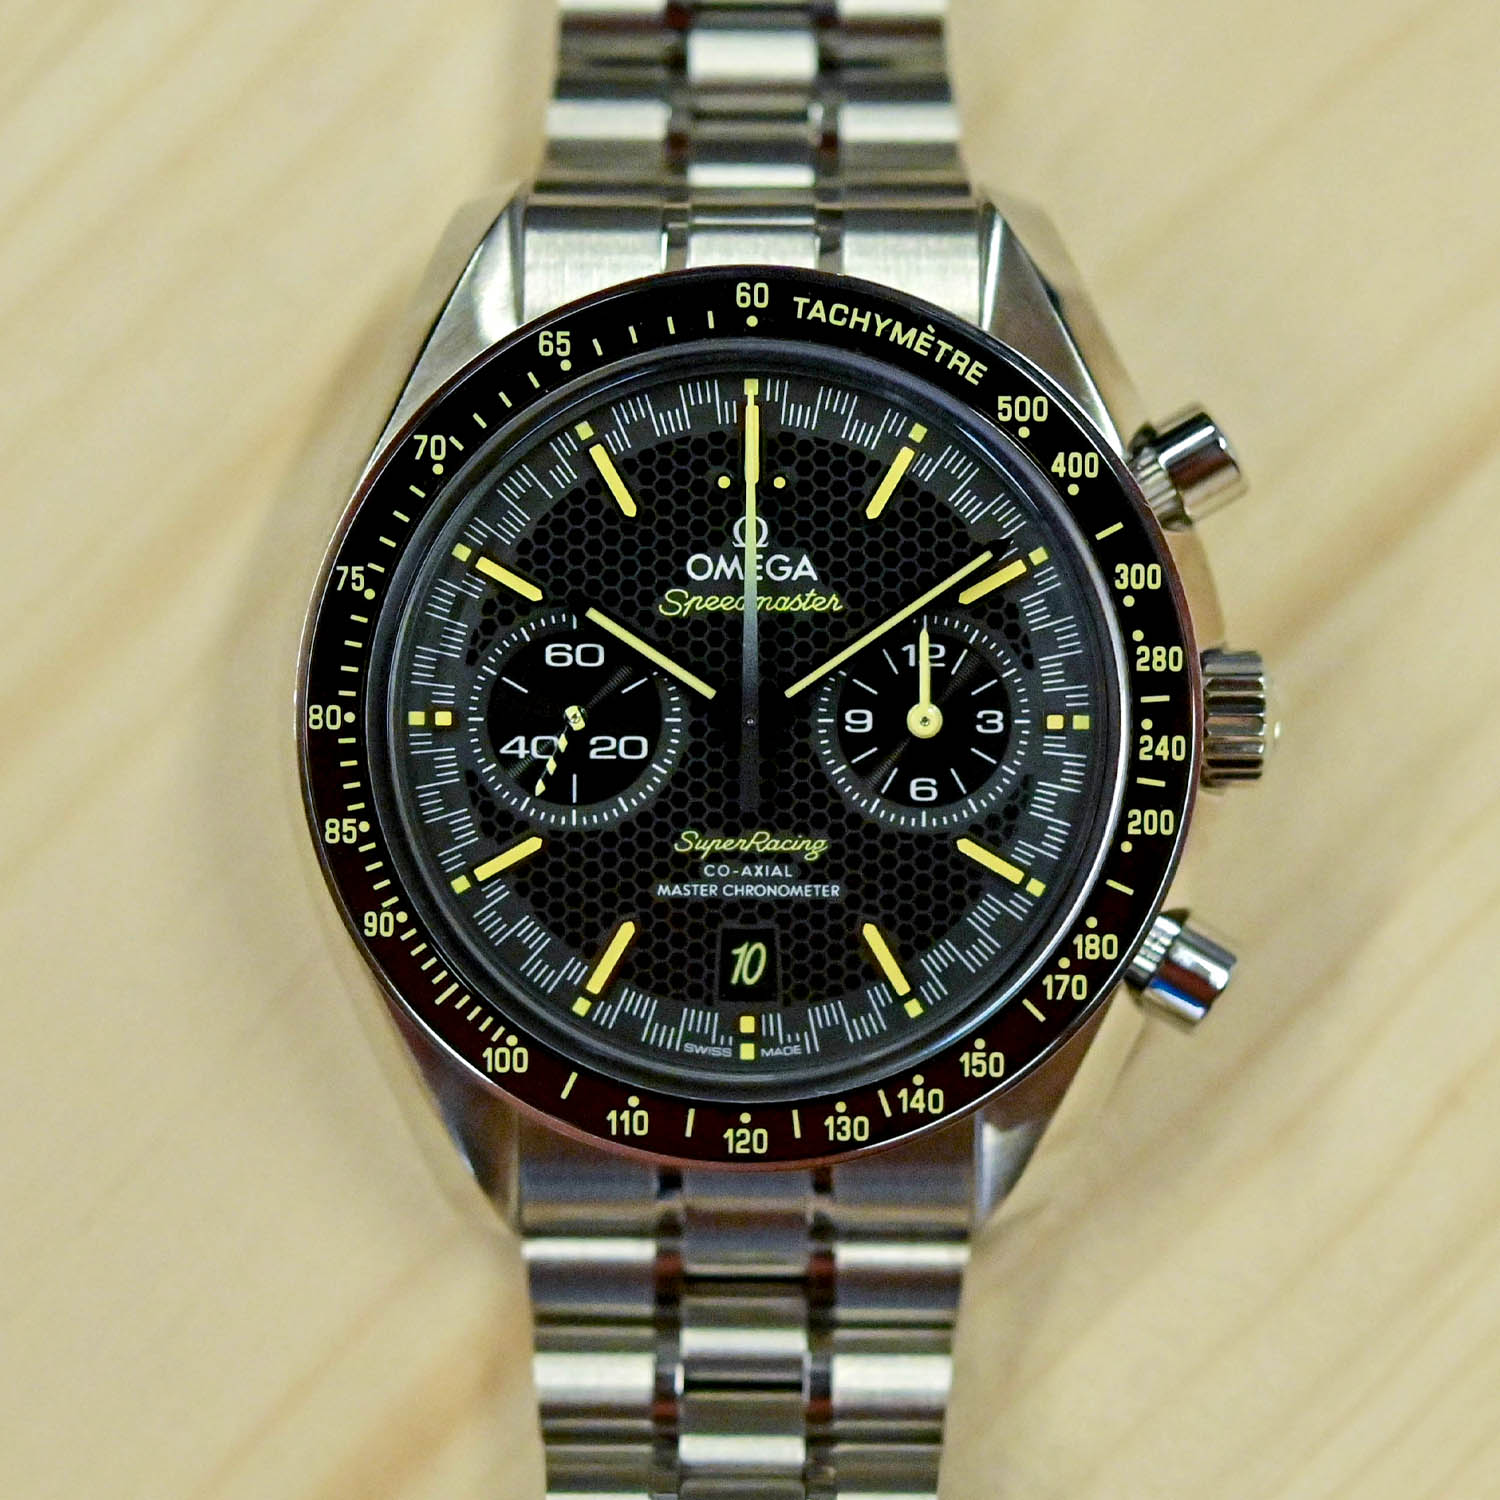 Omega Speedmaster Super Racing and Spirate System - video review